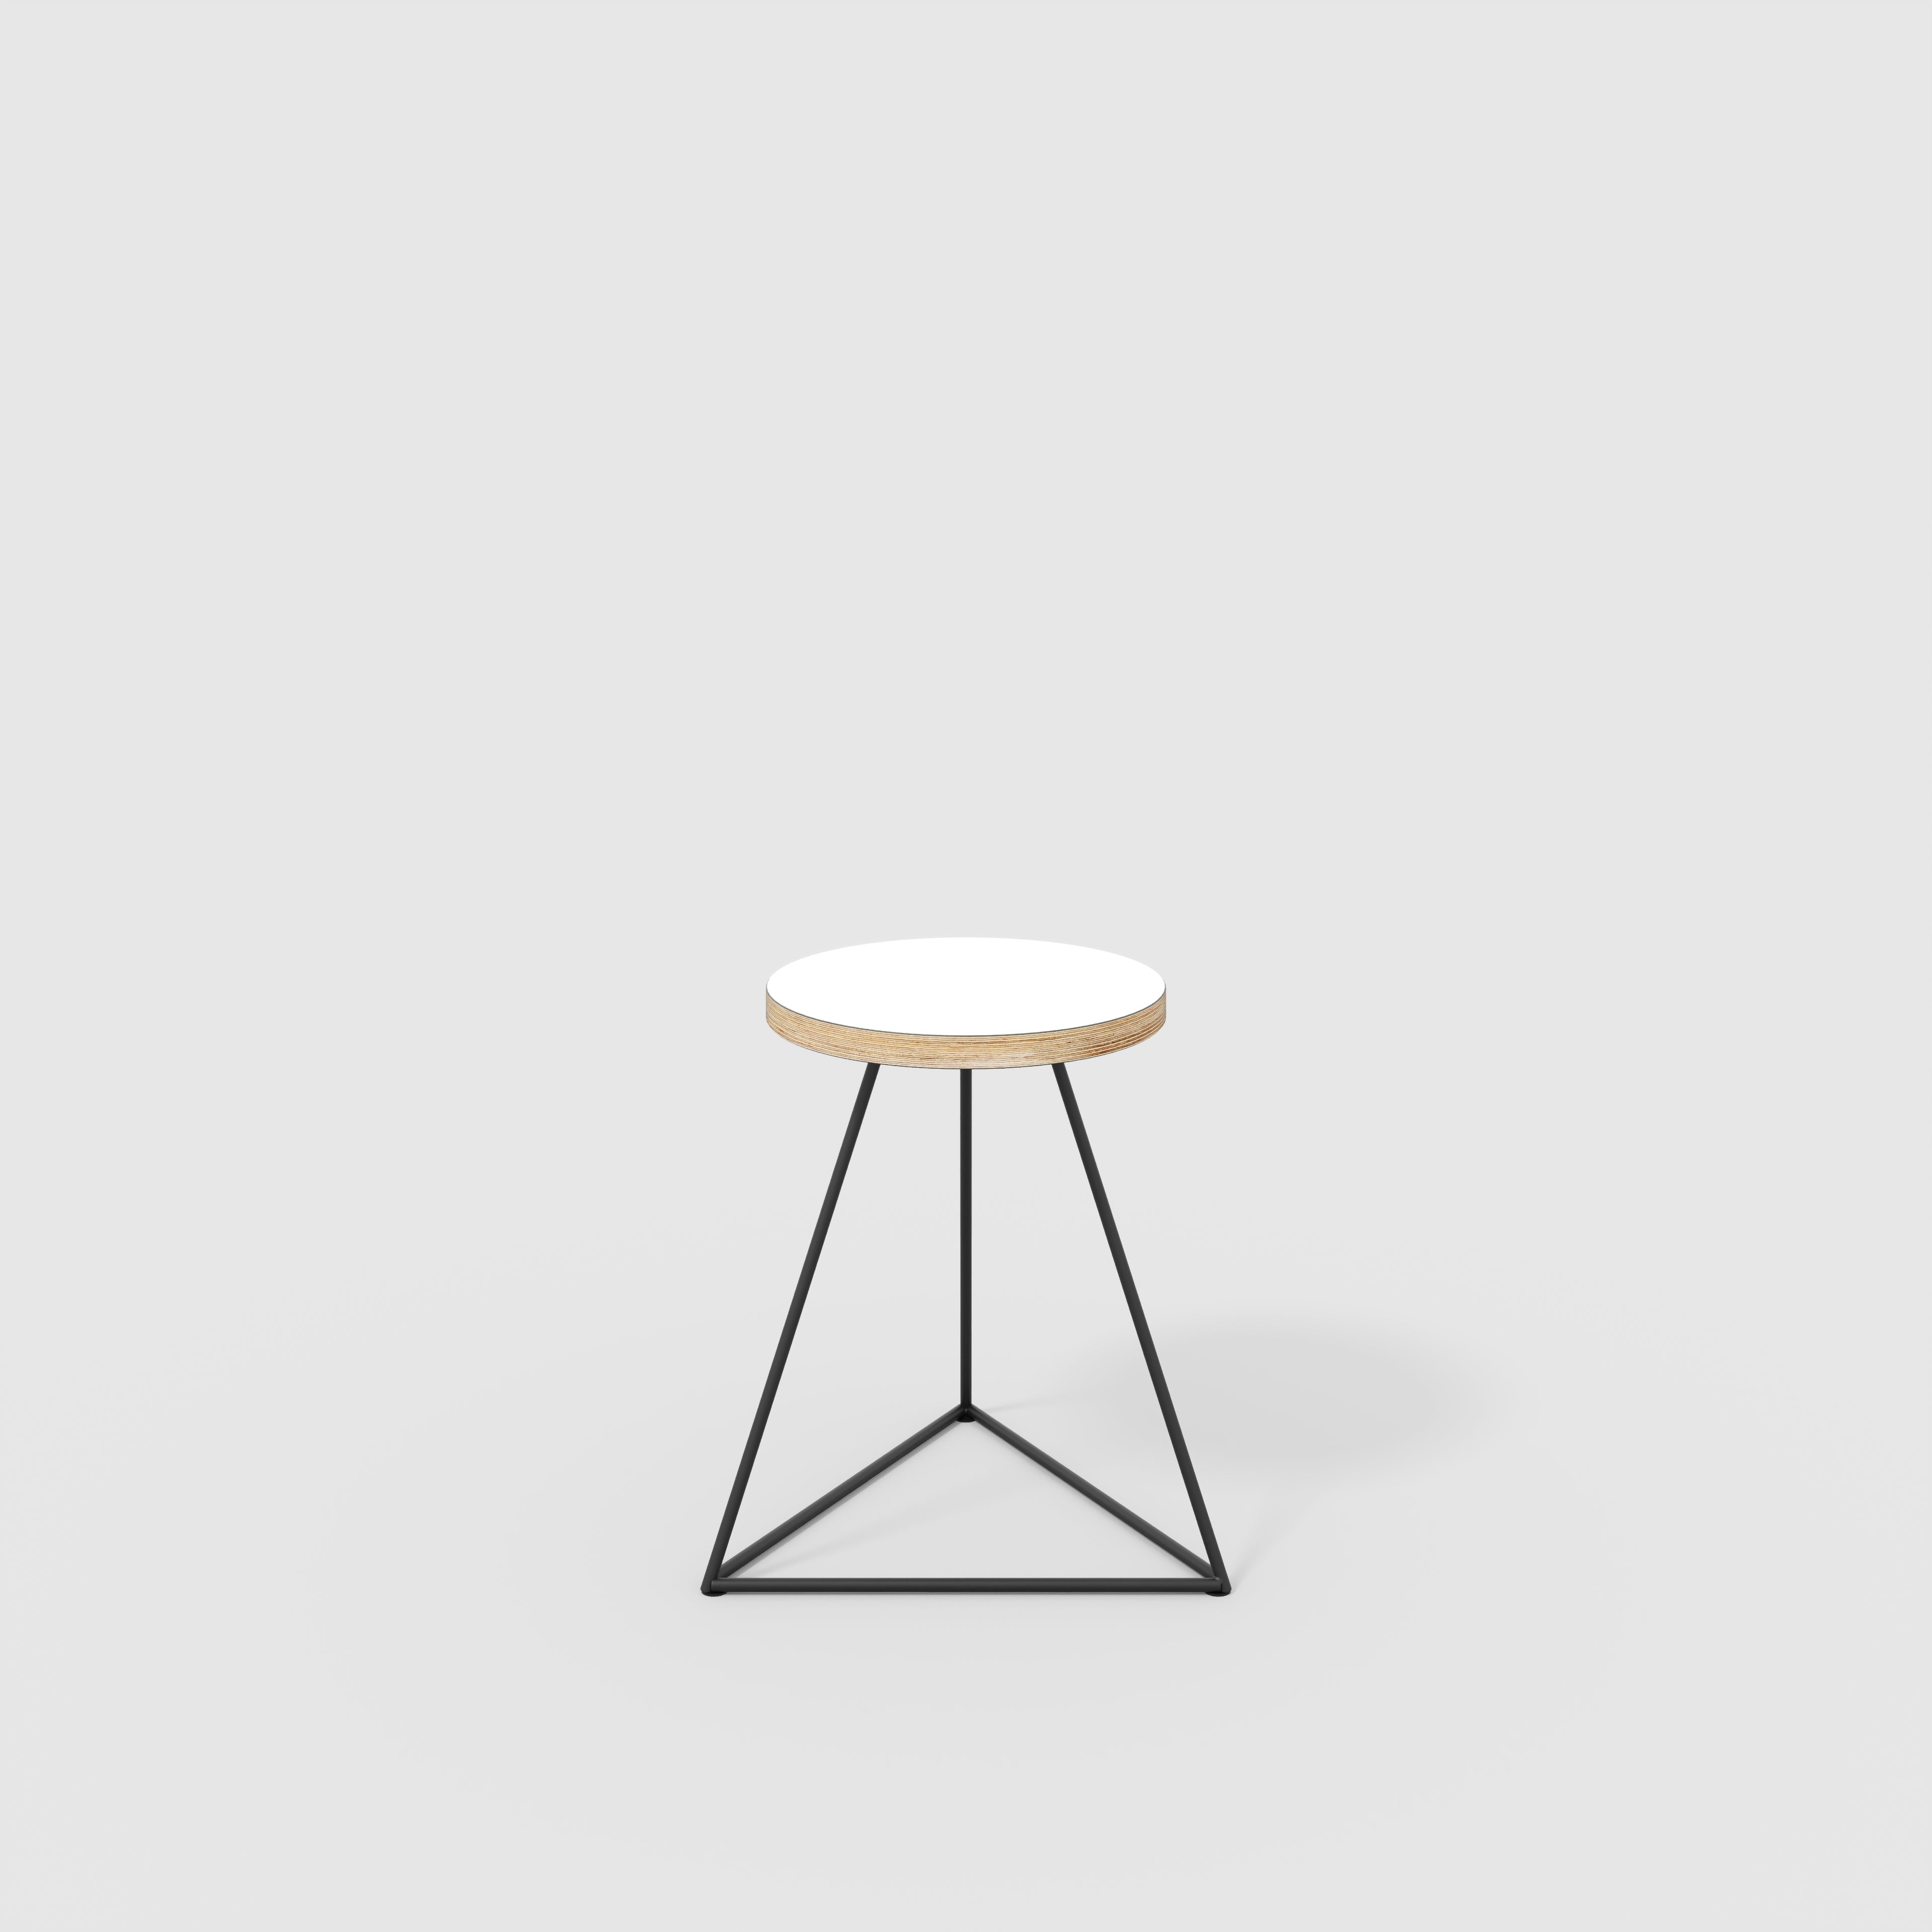 Stool with Black Prism Base - Formica White - 24mm